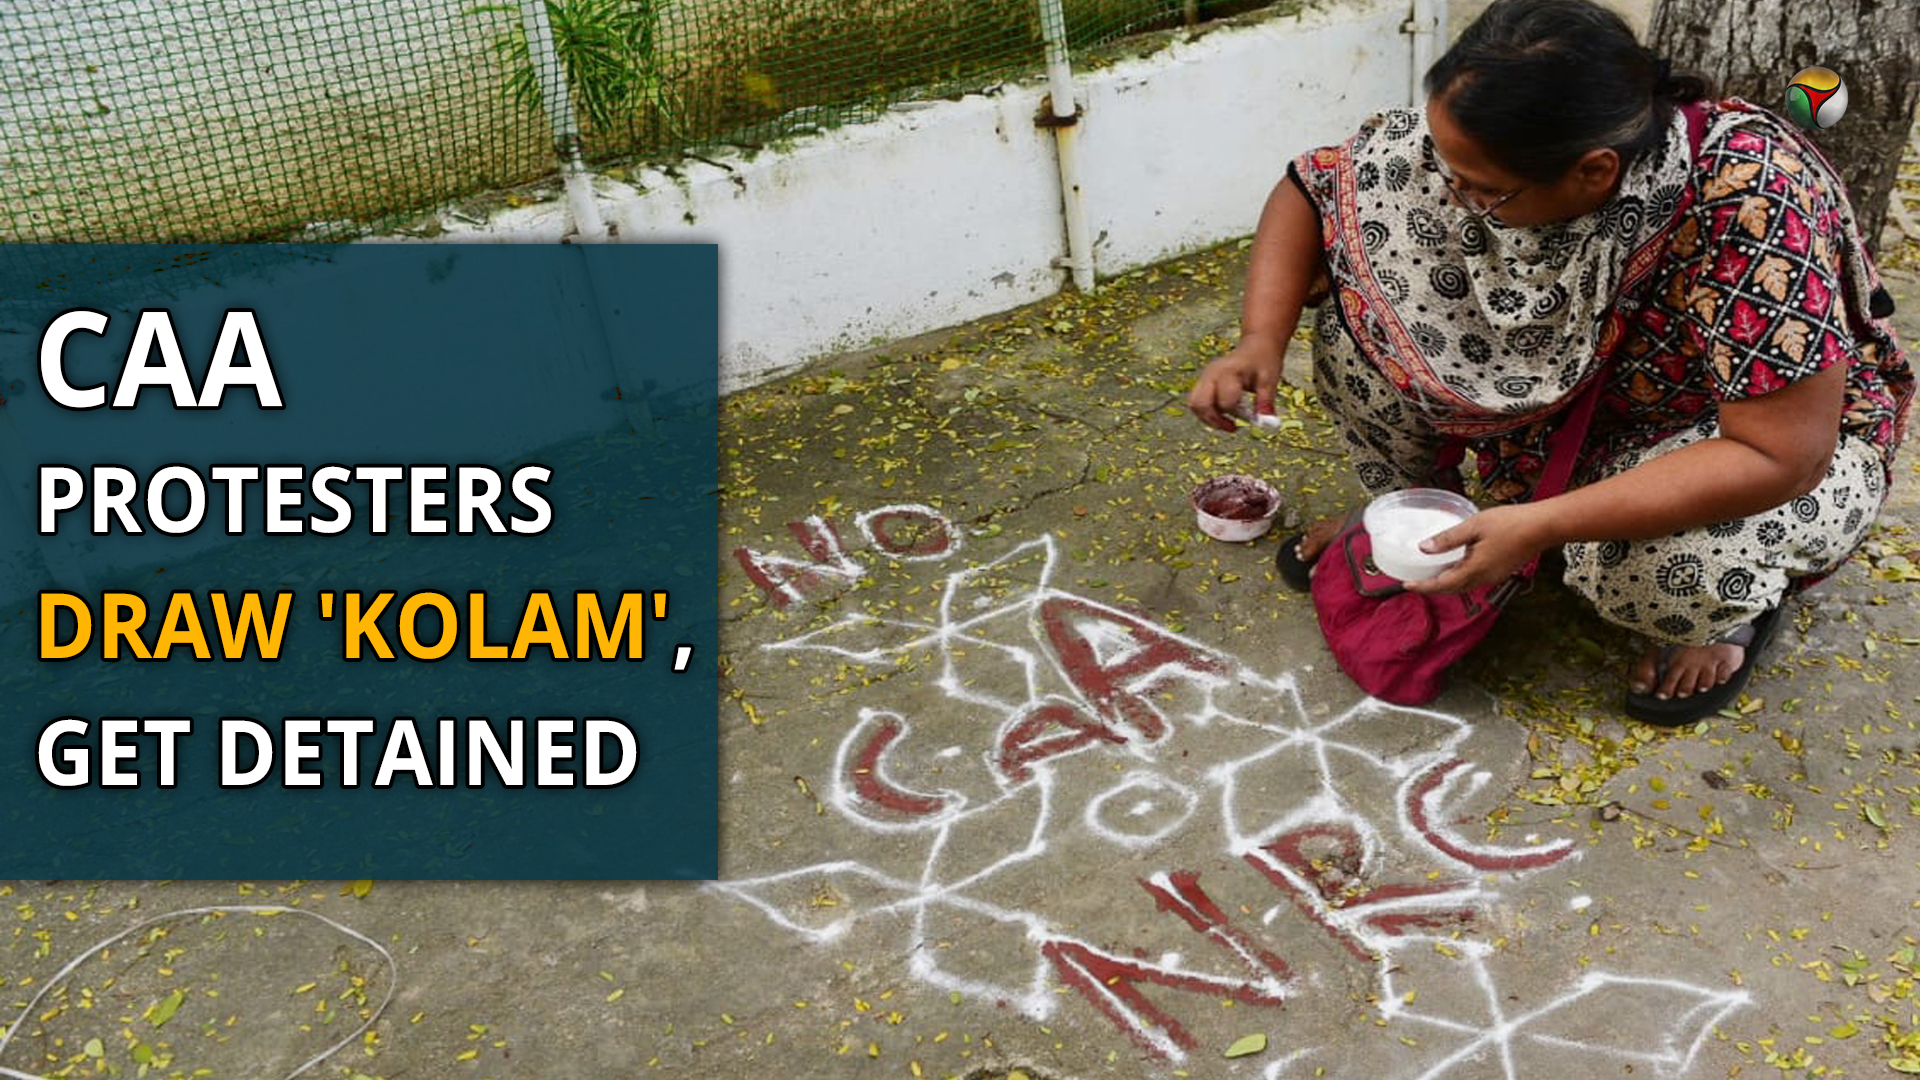 How Kolam is giving voice to CAA protests in Chennai